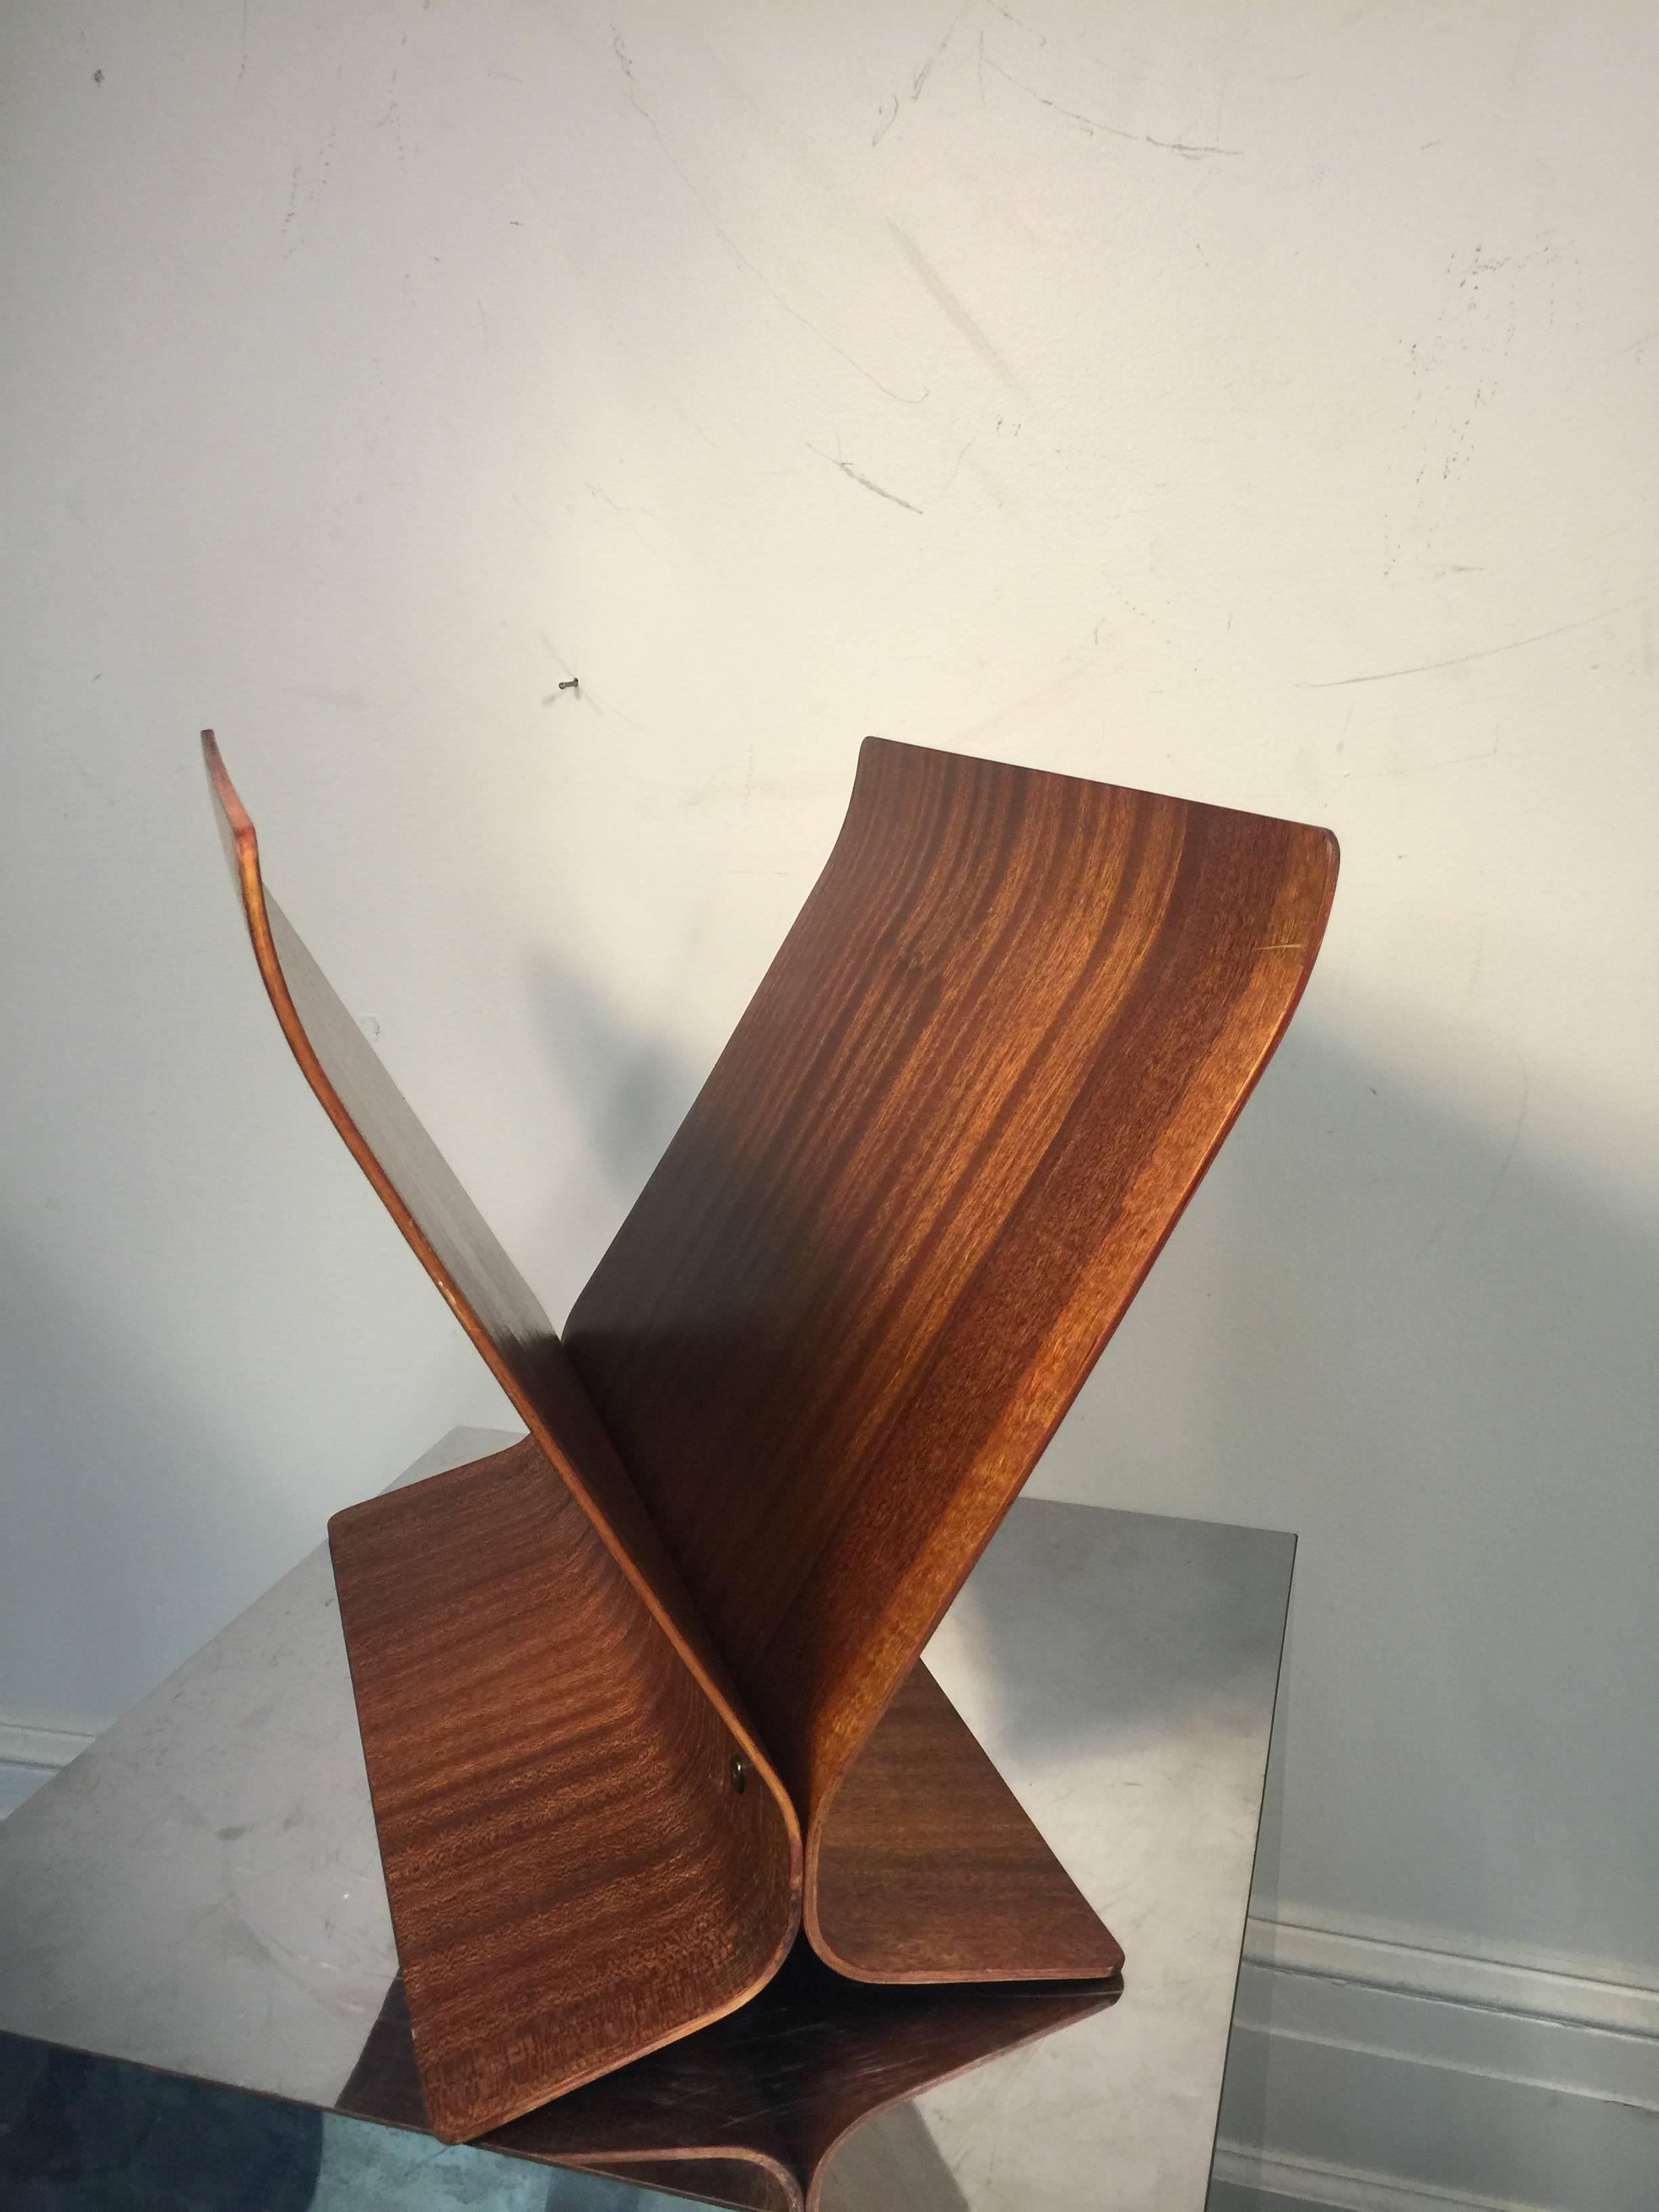 20th Century Magnificent Modern Bentwood Magazine Rack by Paul Rowan for Umbra For Sale